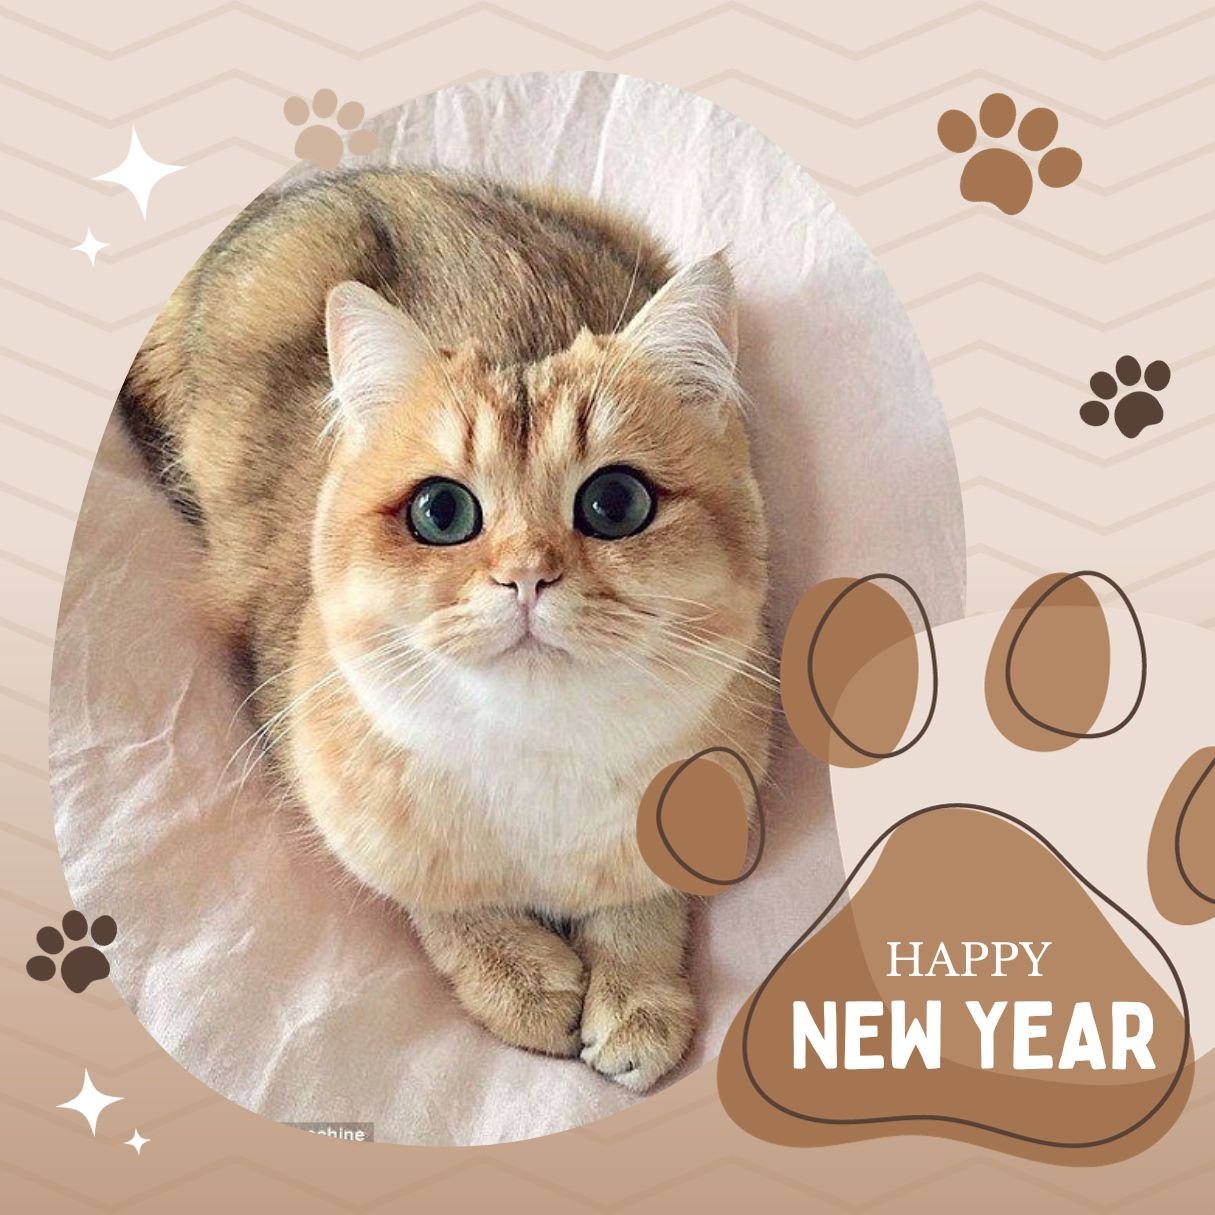 Happy New Year For Cats With Image